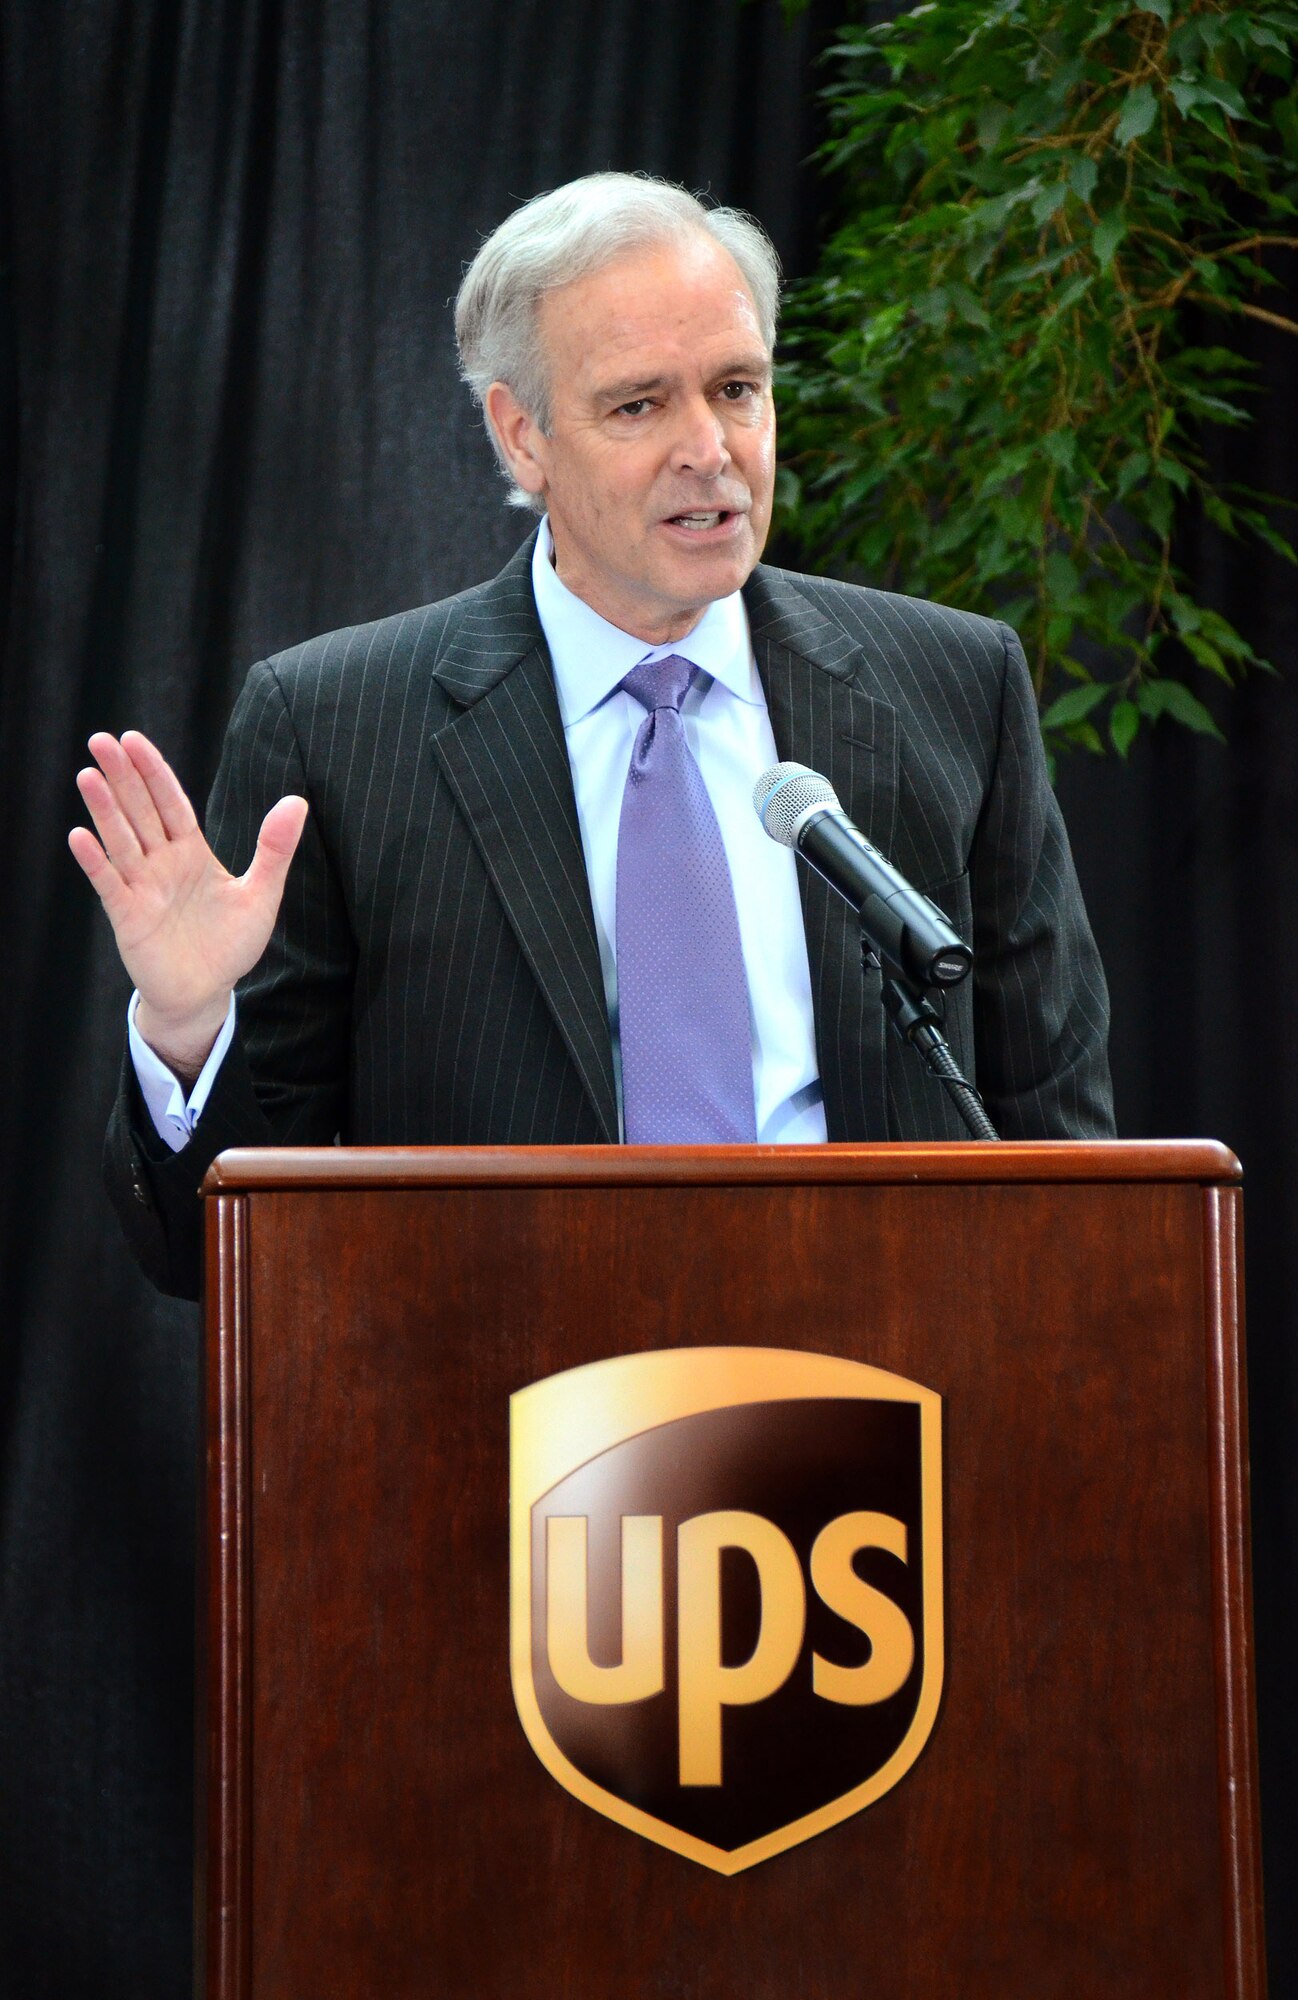 Scott Davis, United Parcel Service chairman and chief executive officer, speaks at the ceremony highlighting the signing of the statement of support for the Employer Support of the Guard and Reserve at the UPS world headquarters, Atlanta, Ga., Feb. 12.  The signing ceremony represents the support UPS provides to the over 23,000 employees who have served or are now serving in the armed forces of the United States.  (U.S. Air Force photo/ Brad Fallin)